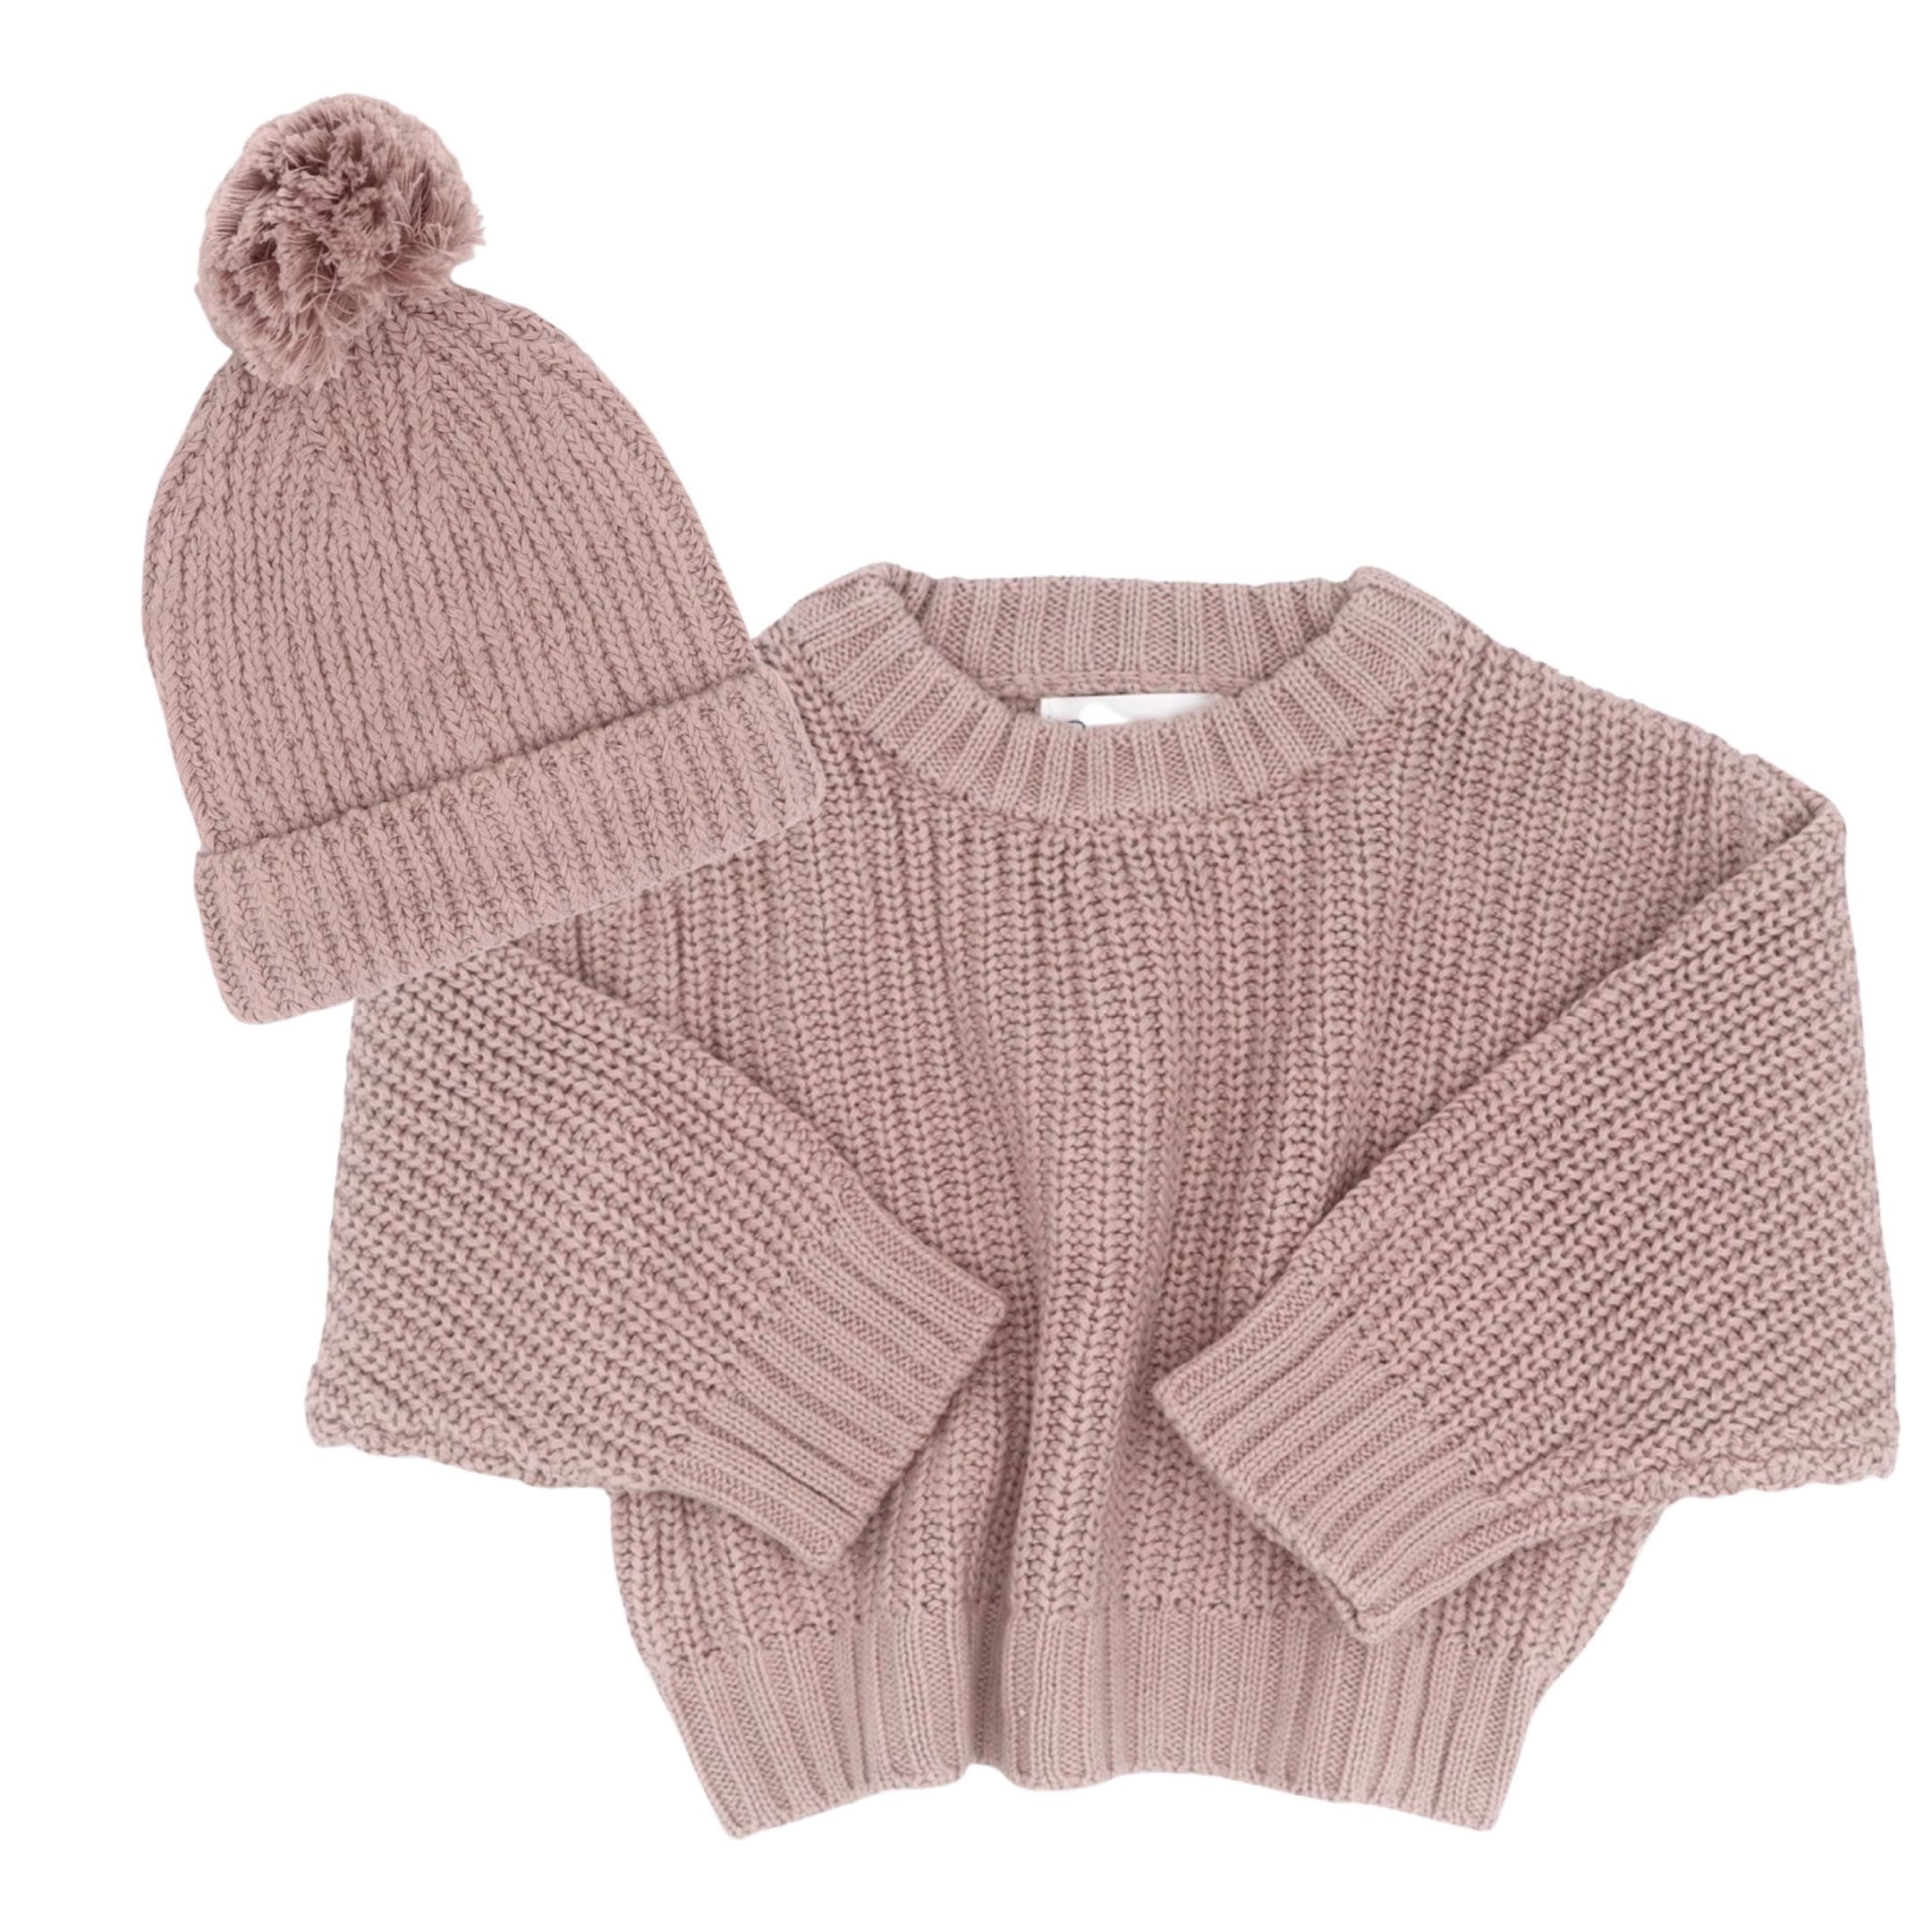 Bubbadue Knitted Baby Jersey & Beanie Set - Dusty Lilac - Bubbadue